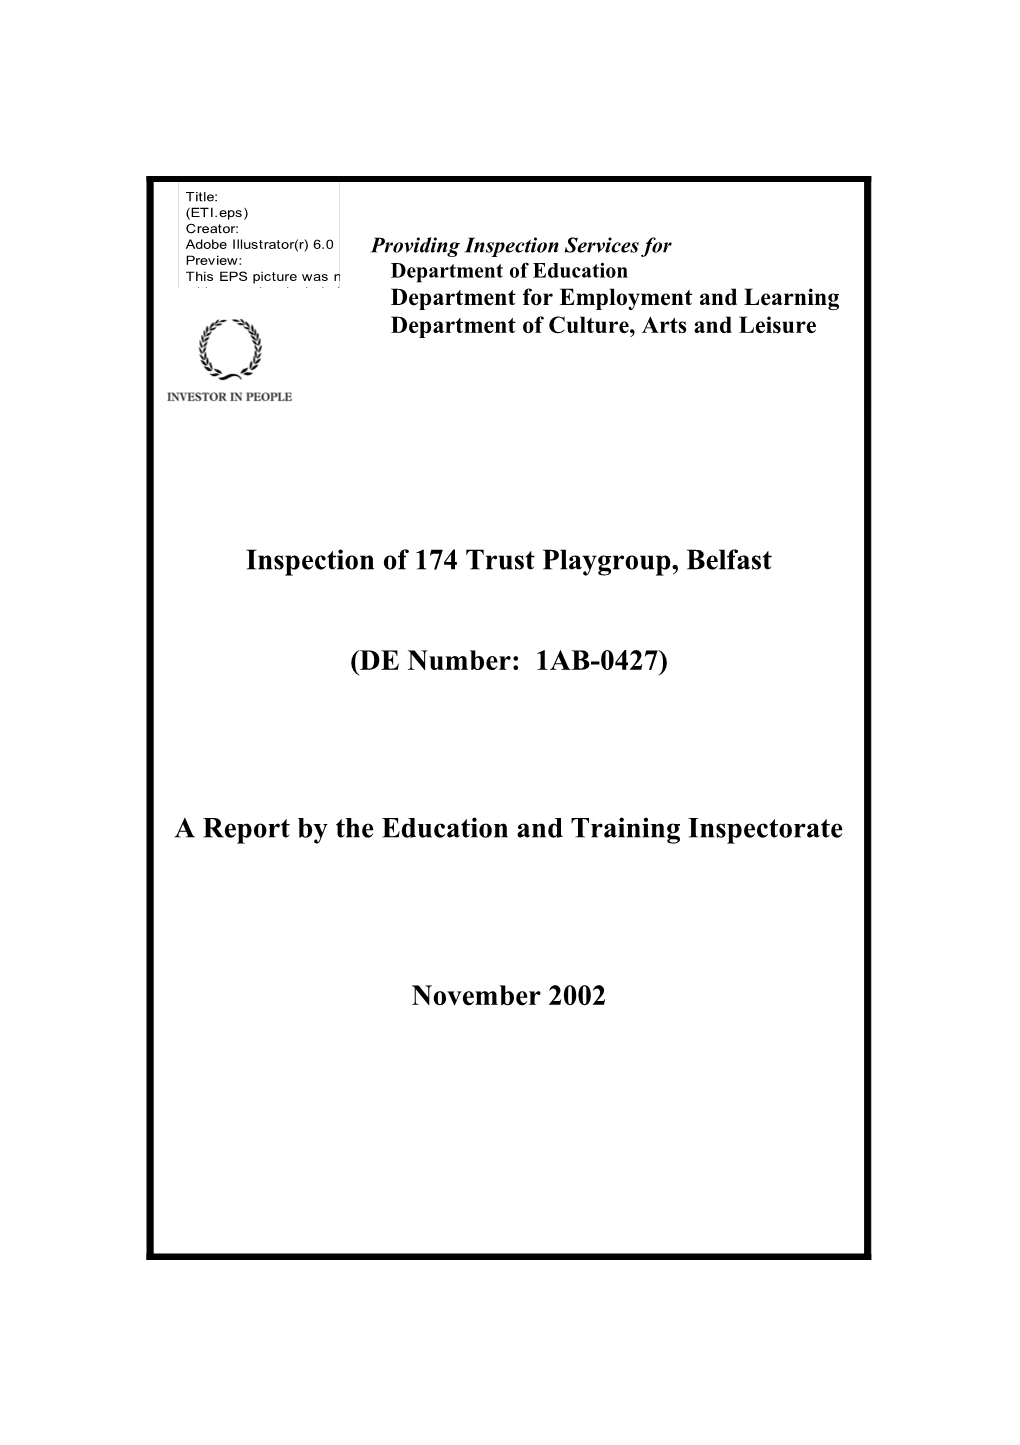 Report on the Inspection of 174 Trust Playgroup, Duncairn Complex, Belfast, November 2002